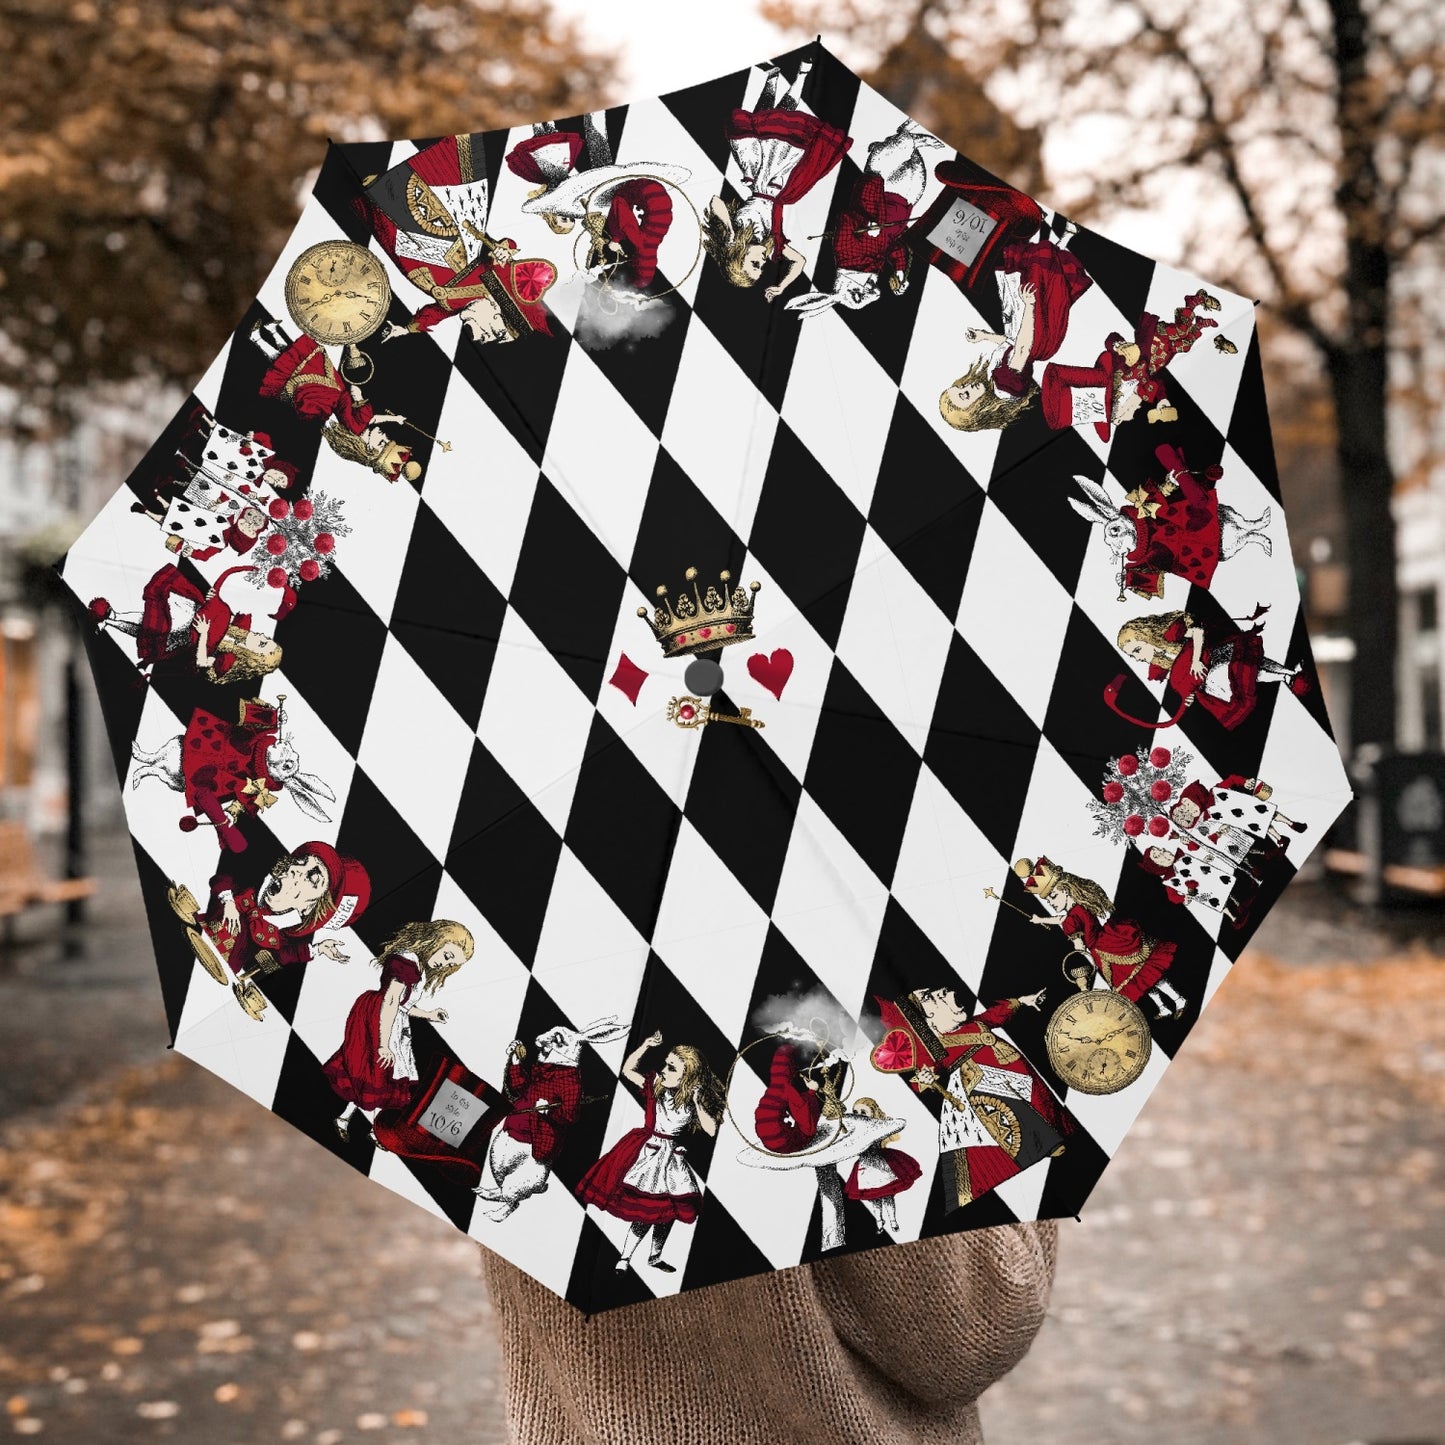 Alice In Wonderland - Queen Of Hearts Automatic Umbrella - Mad Hatter Tea Party Parasol (UMQOH)